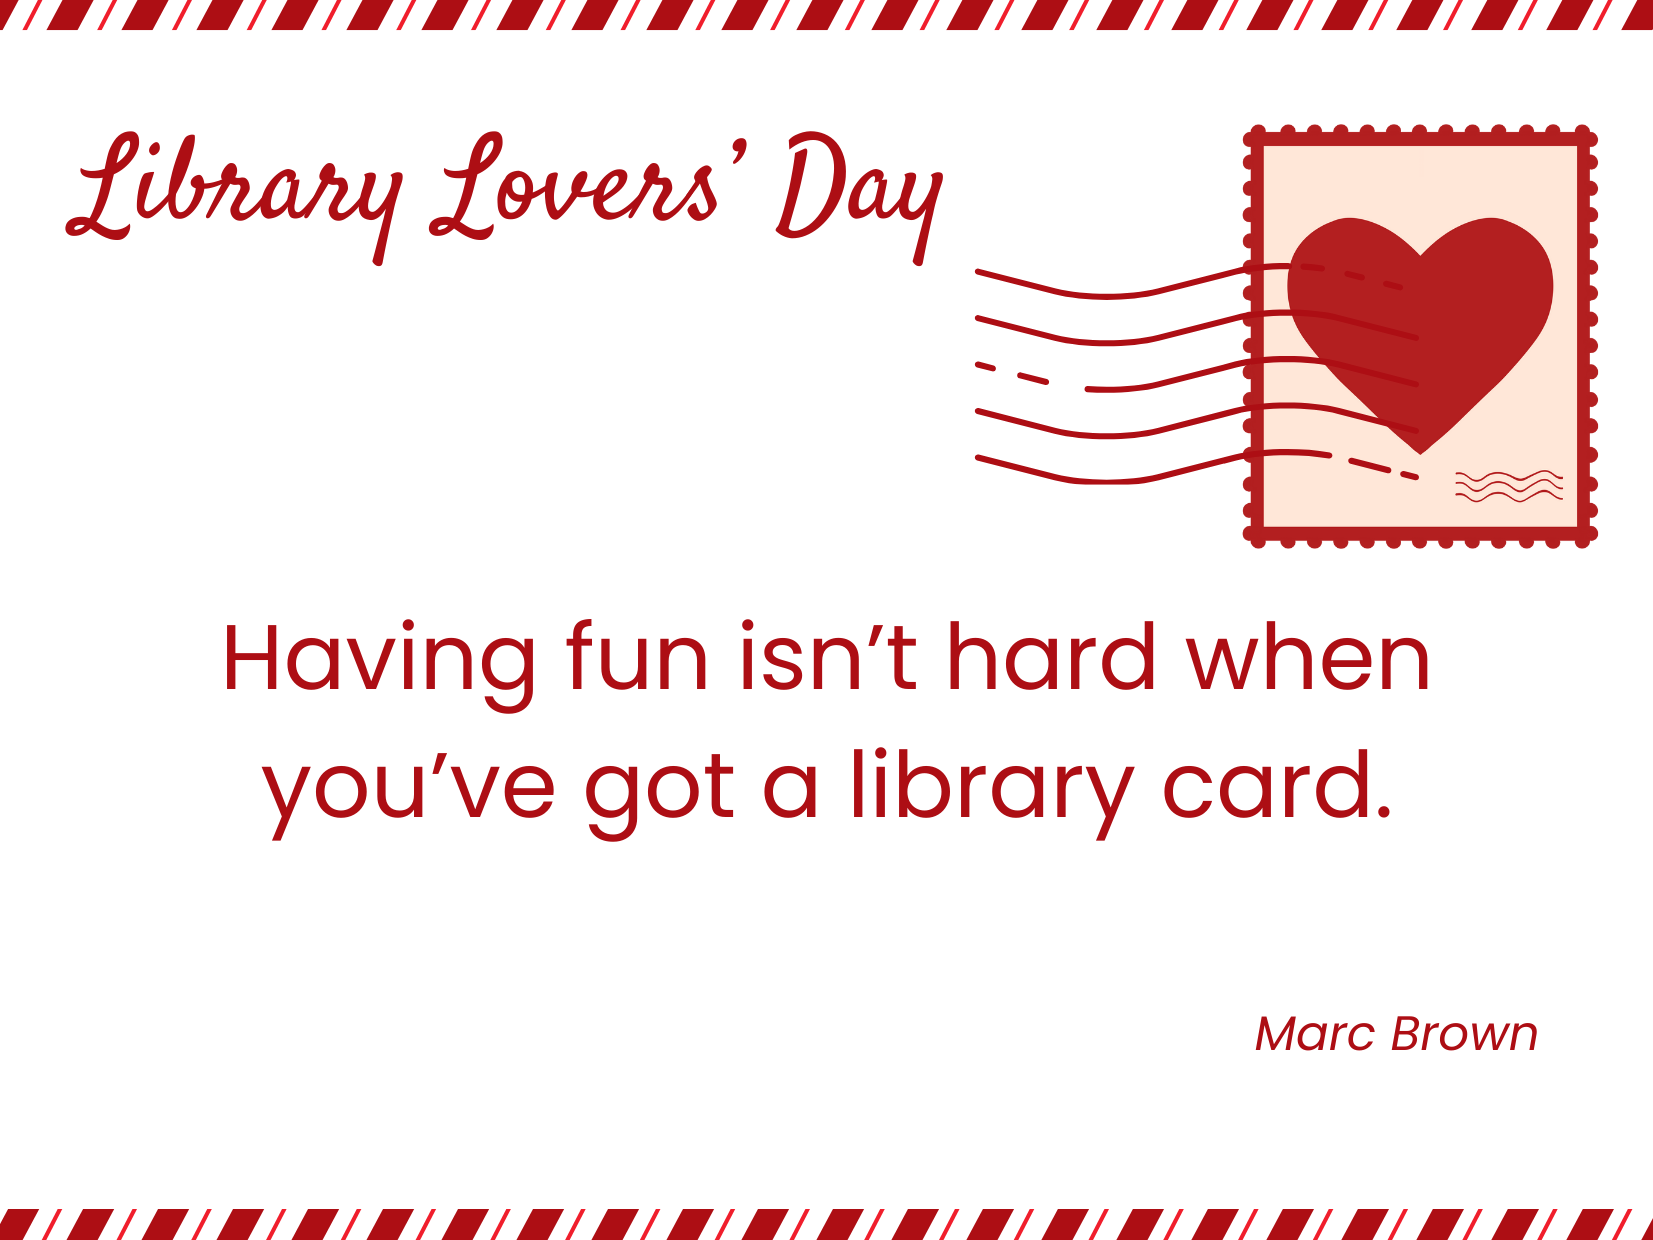 Library Lovers' Day image